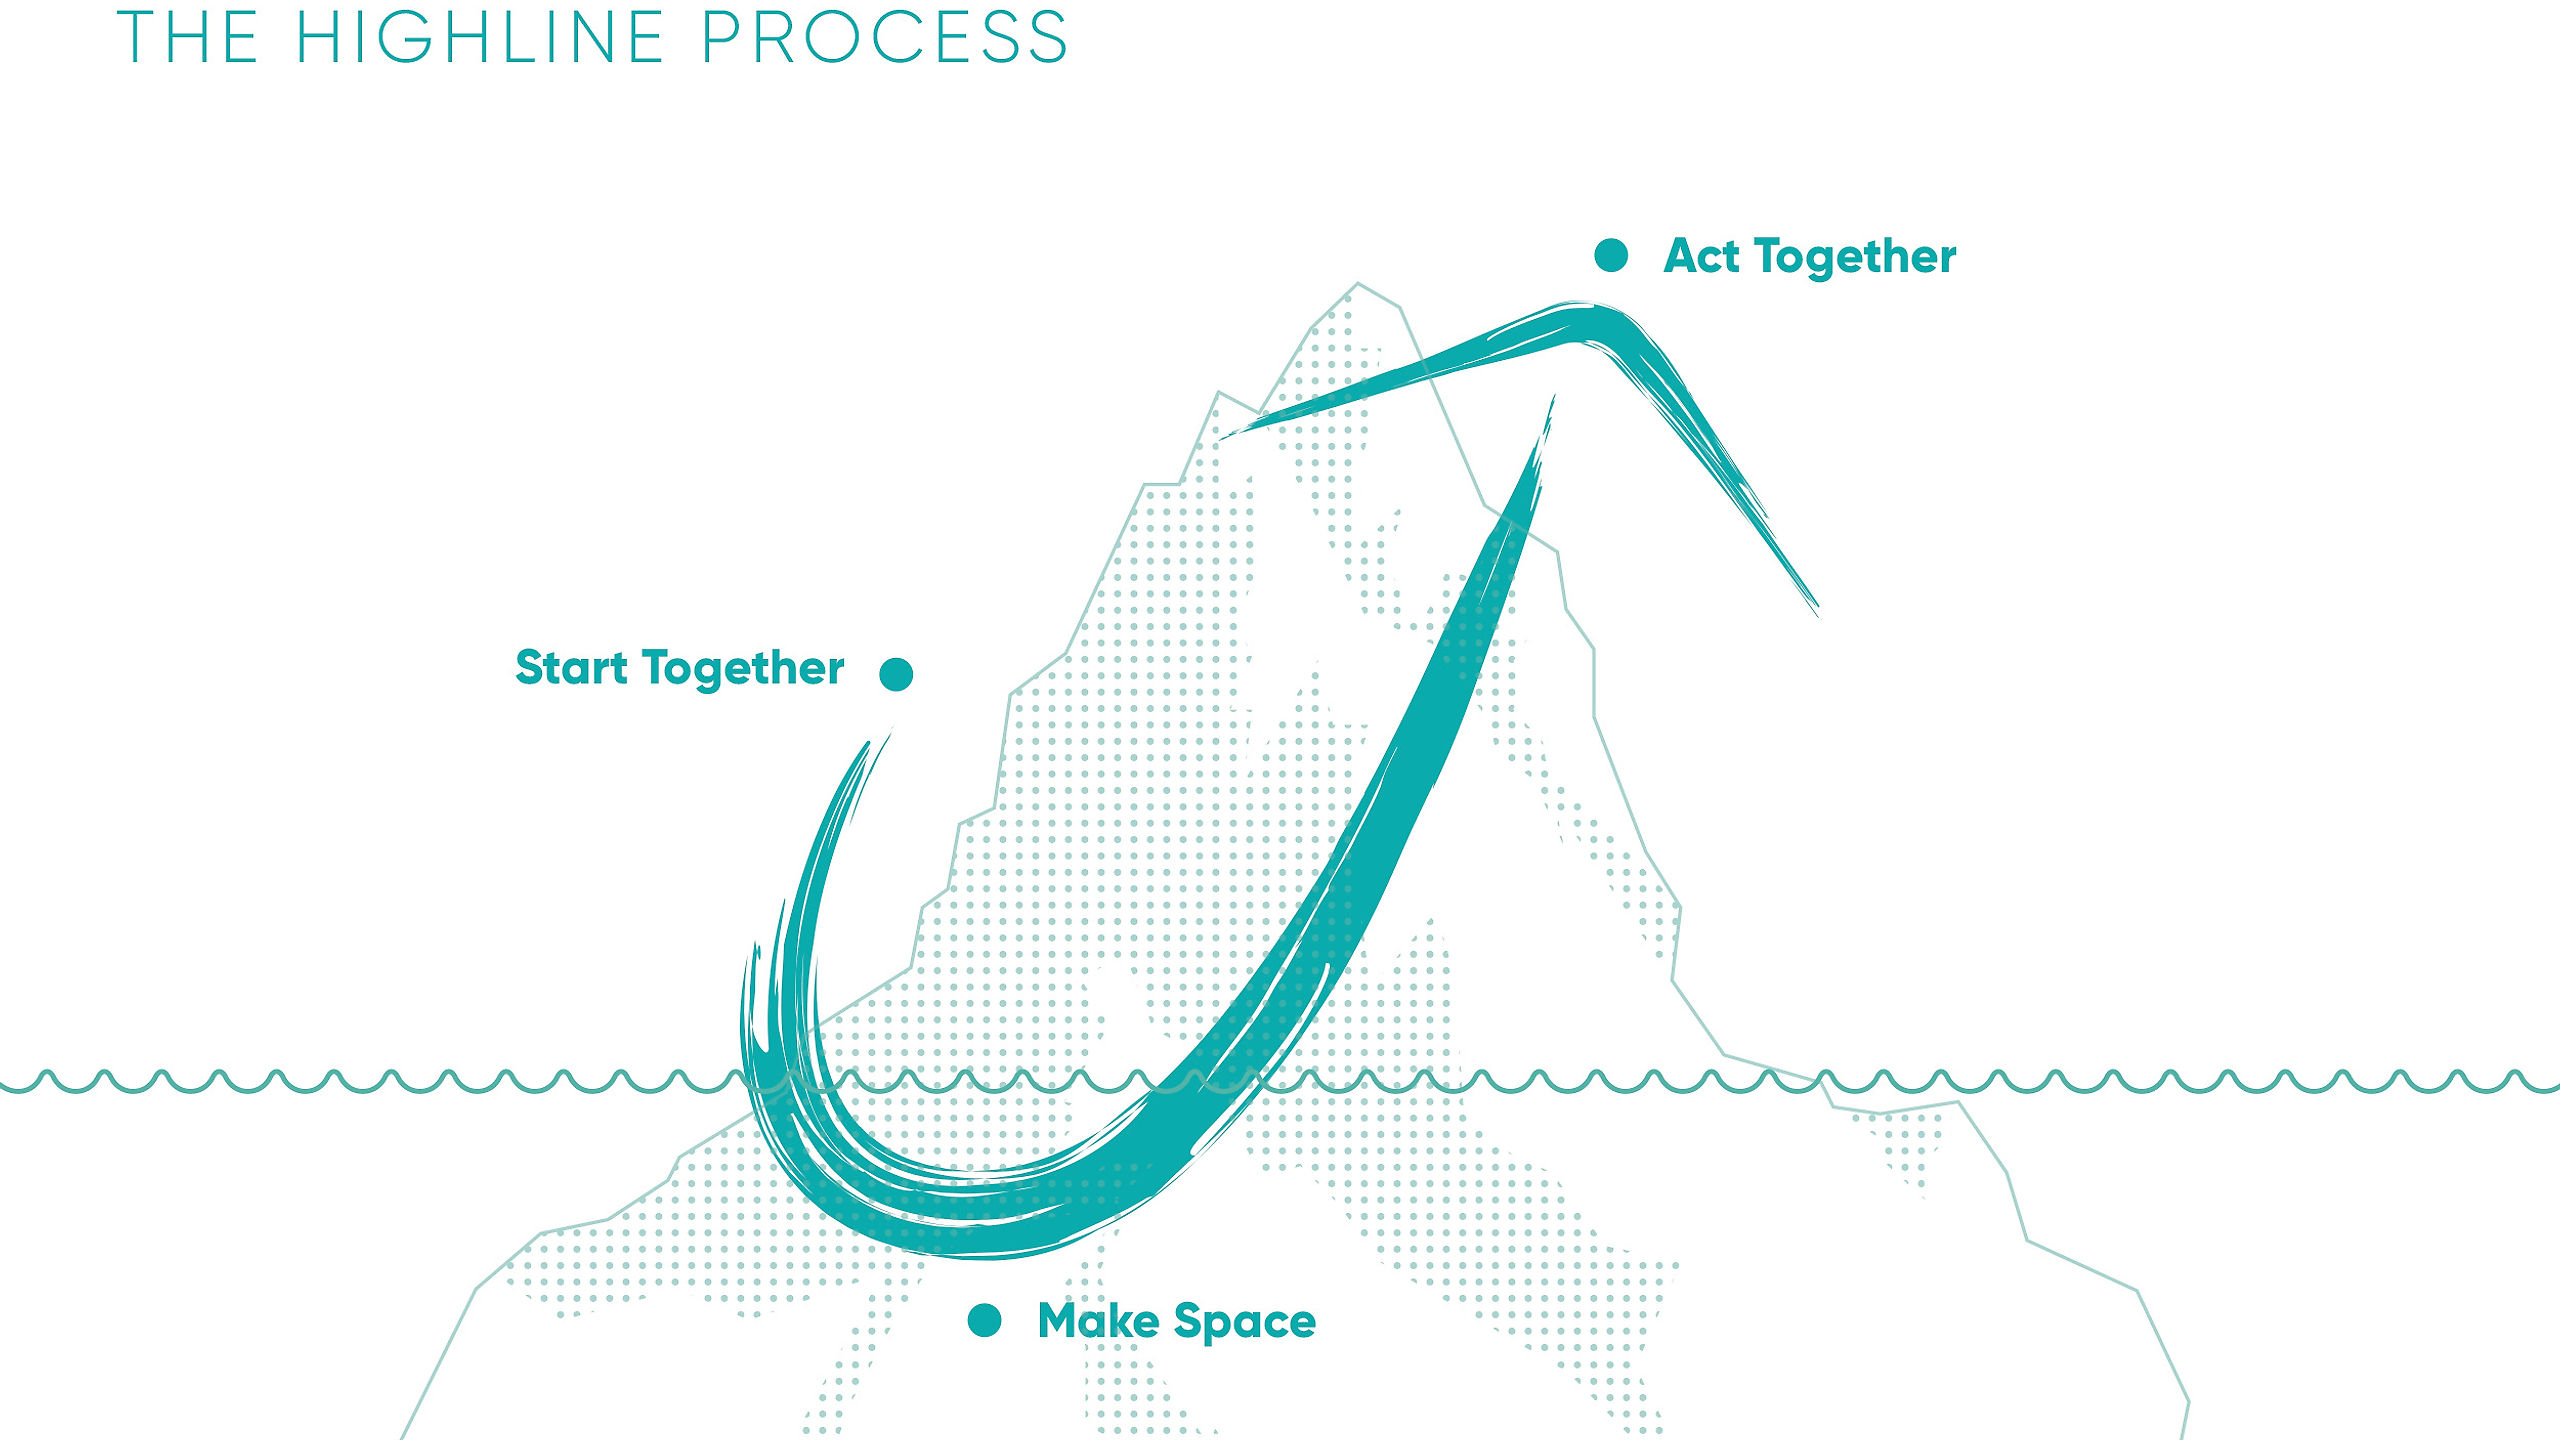 See Our Work in Action - The Highline Process